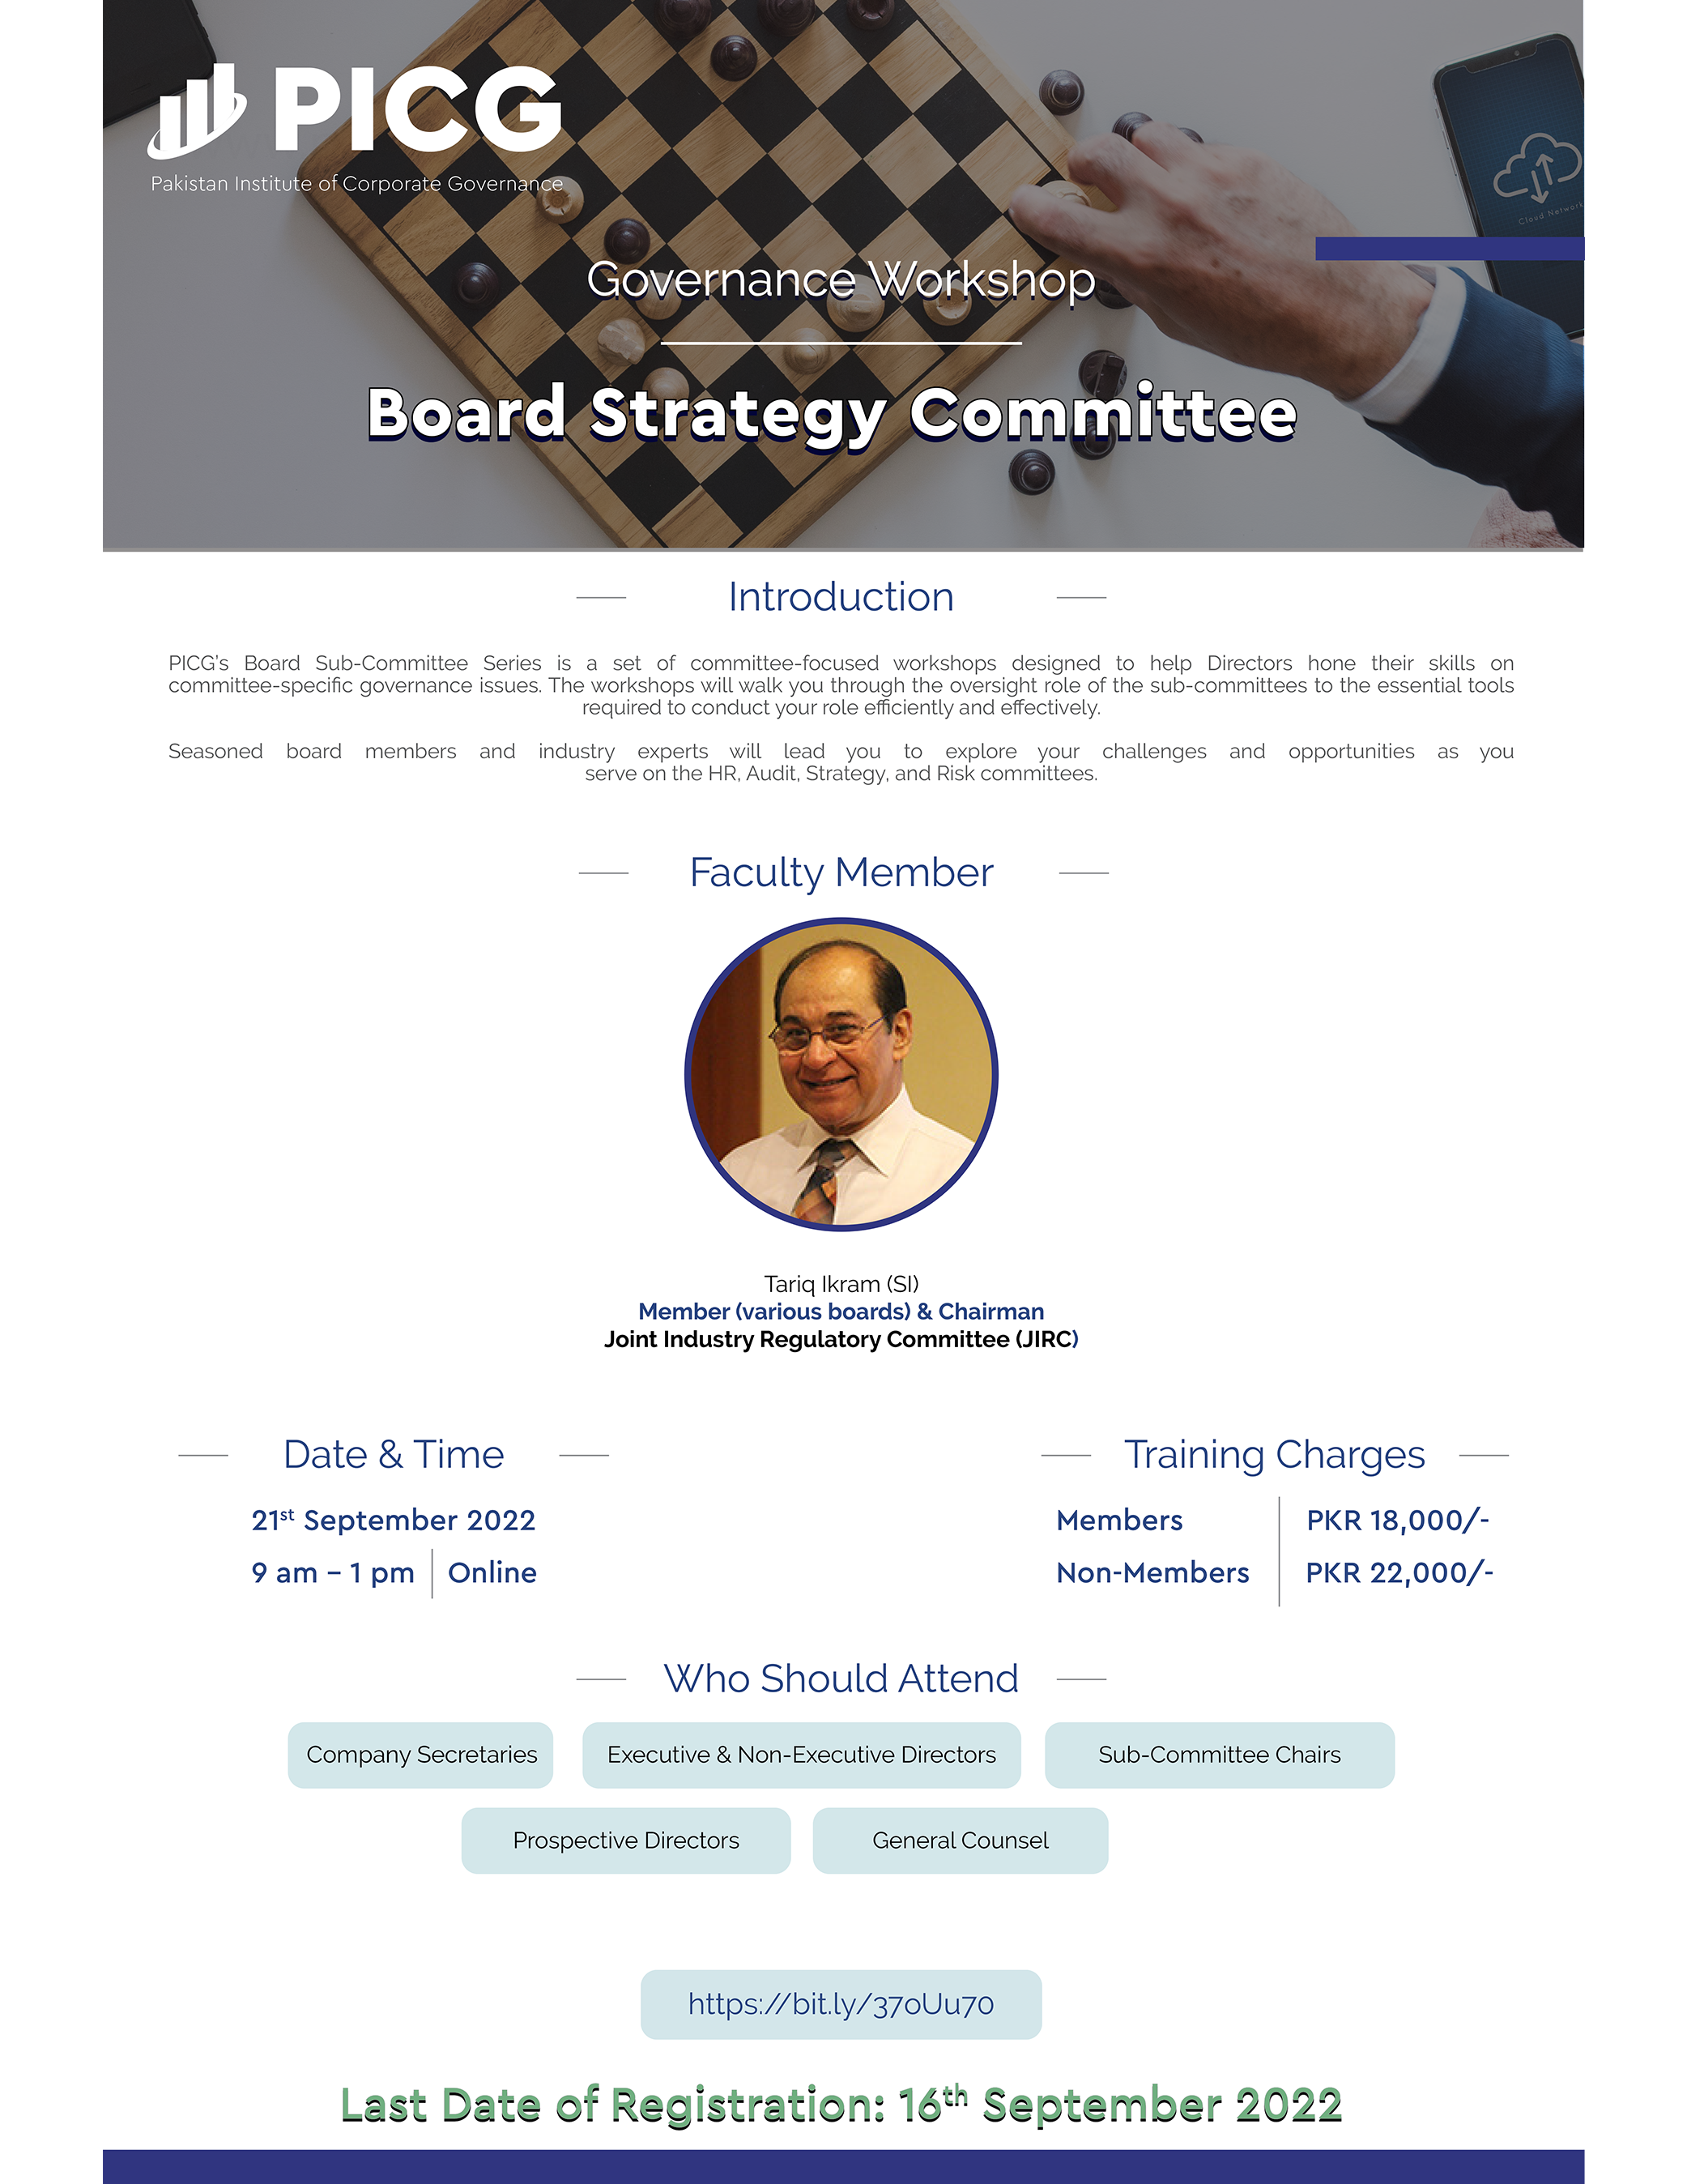 The PICG Presents Board Strategy Committee